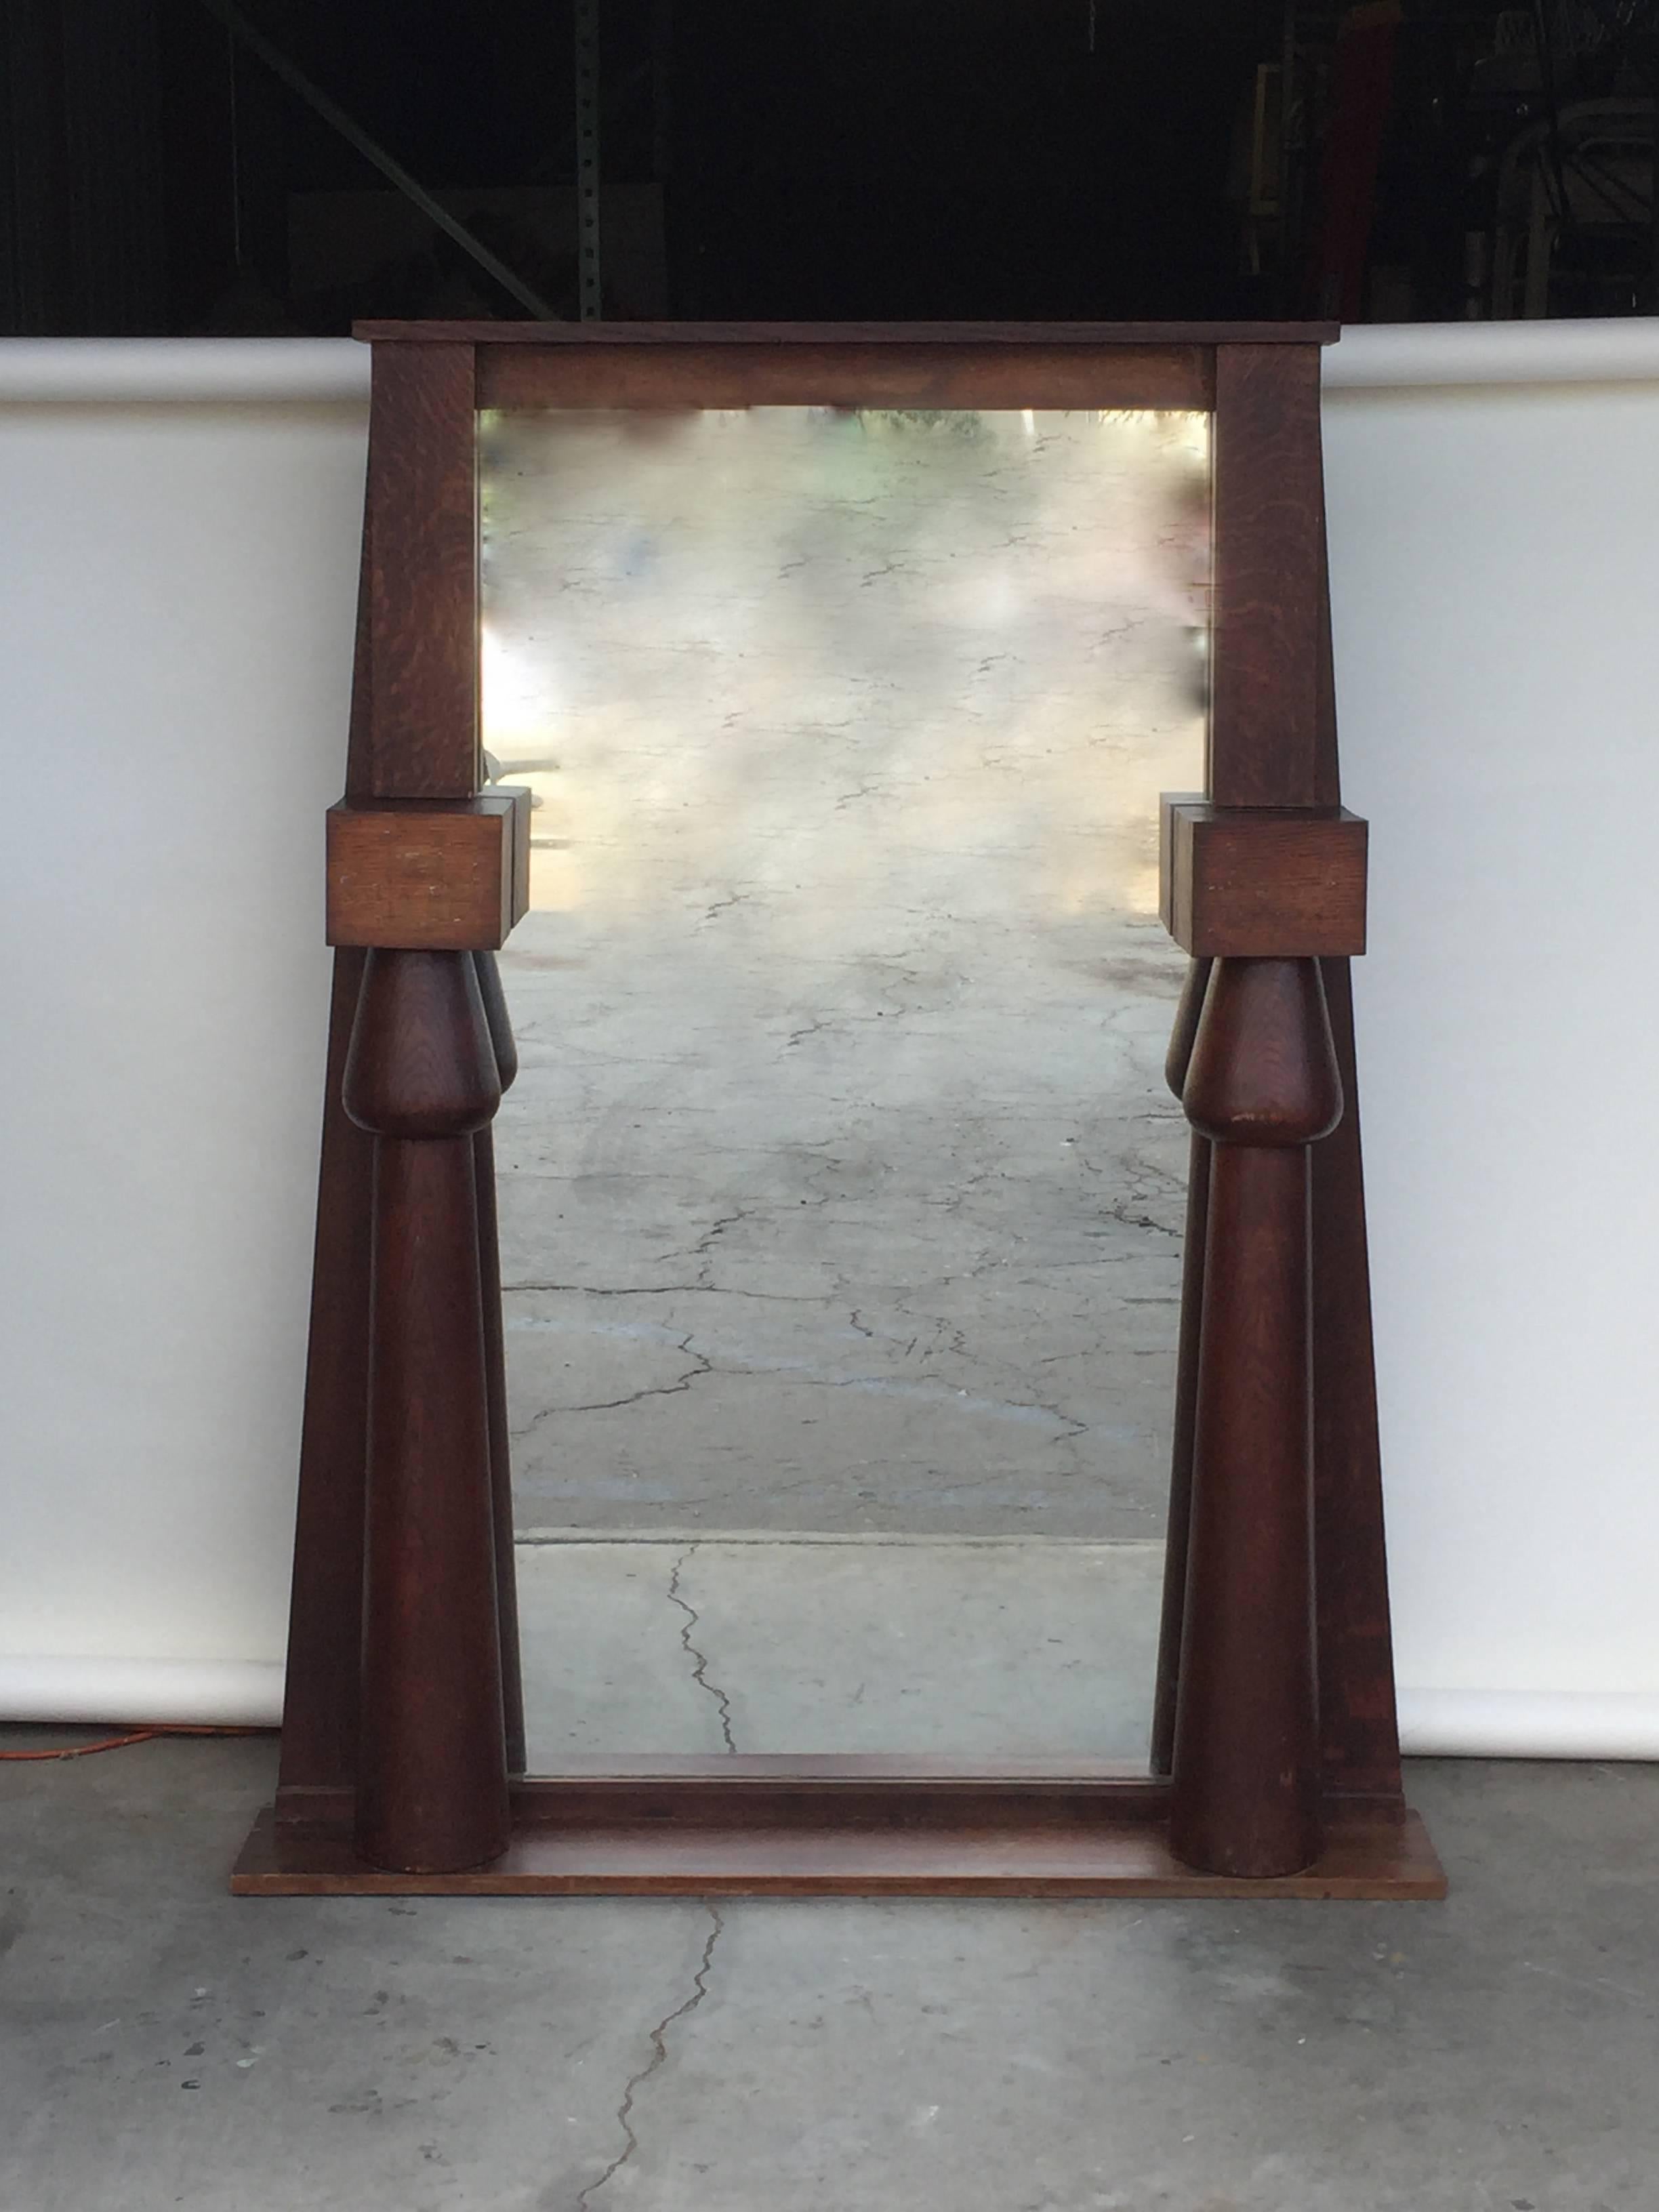 Impressive Egyptian Revival Arts & Crafts stained oak mirror. Perfect over a fireplace.